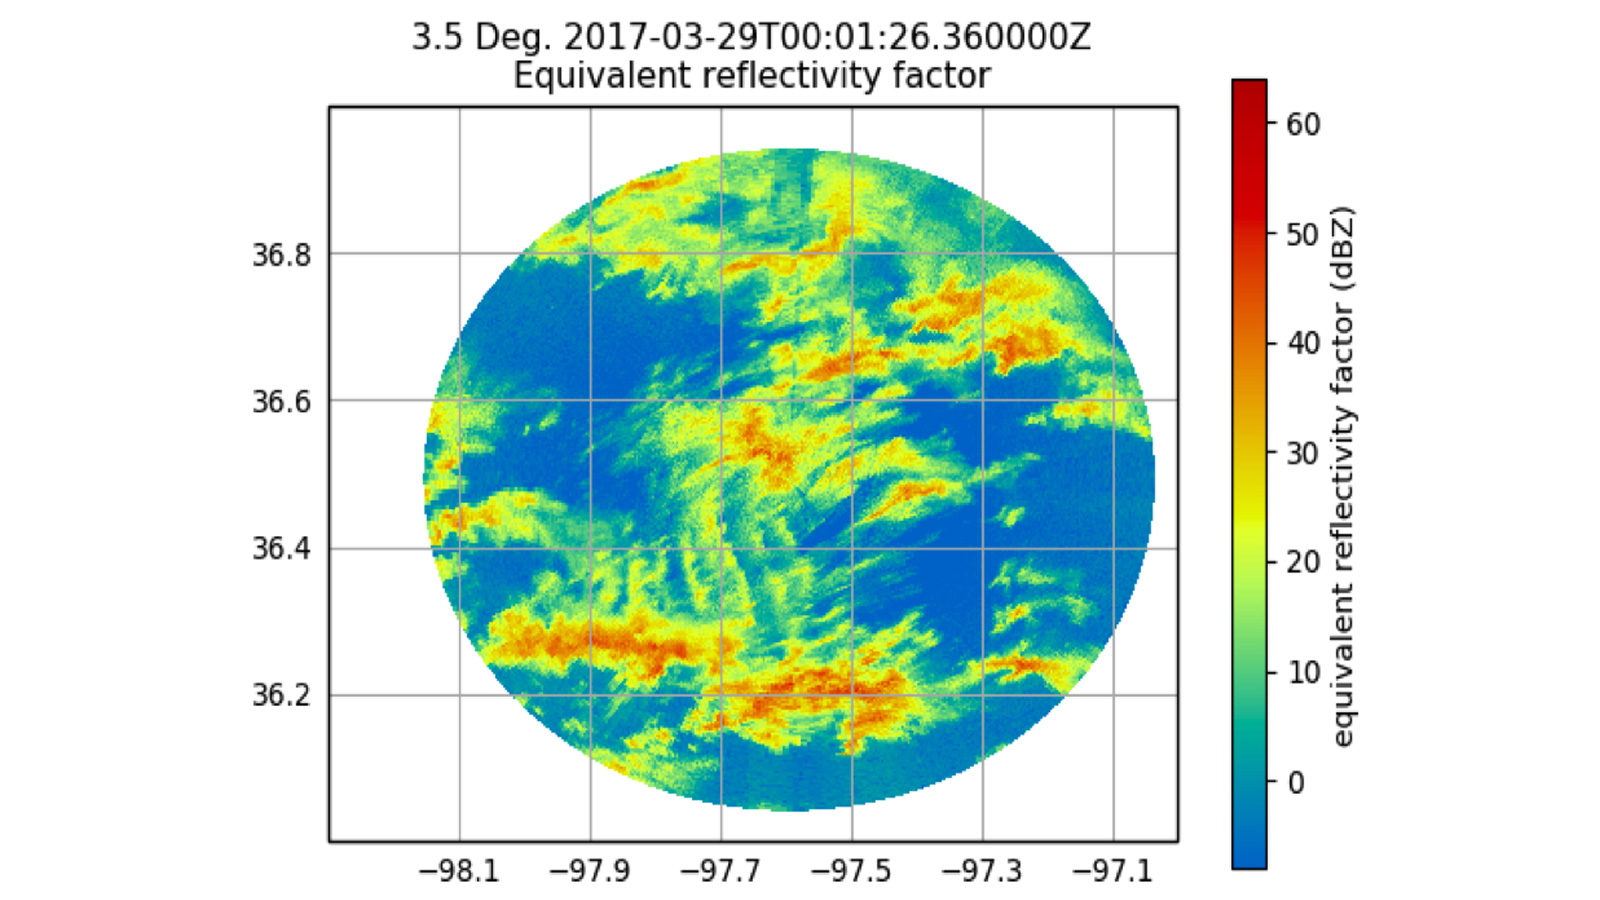 This image shows the Radar Reflectivity Factor (proportional to both the number and size of raindrops) from the ARM User Facility’s X-Band Radar in Northern Oklahoma.